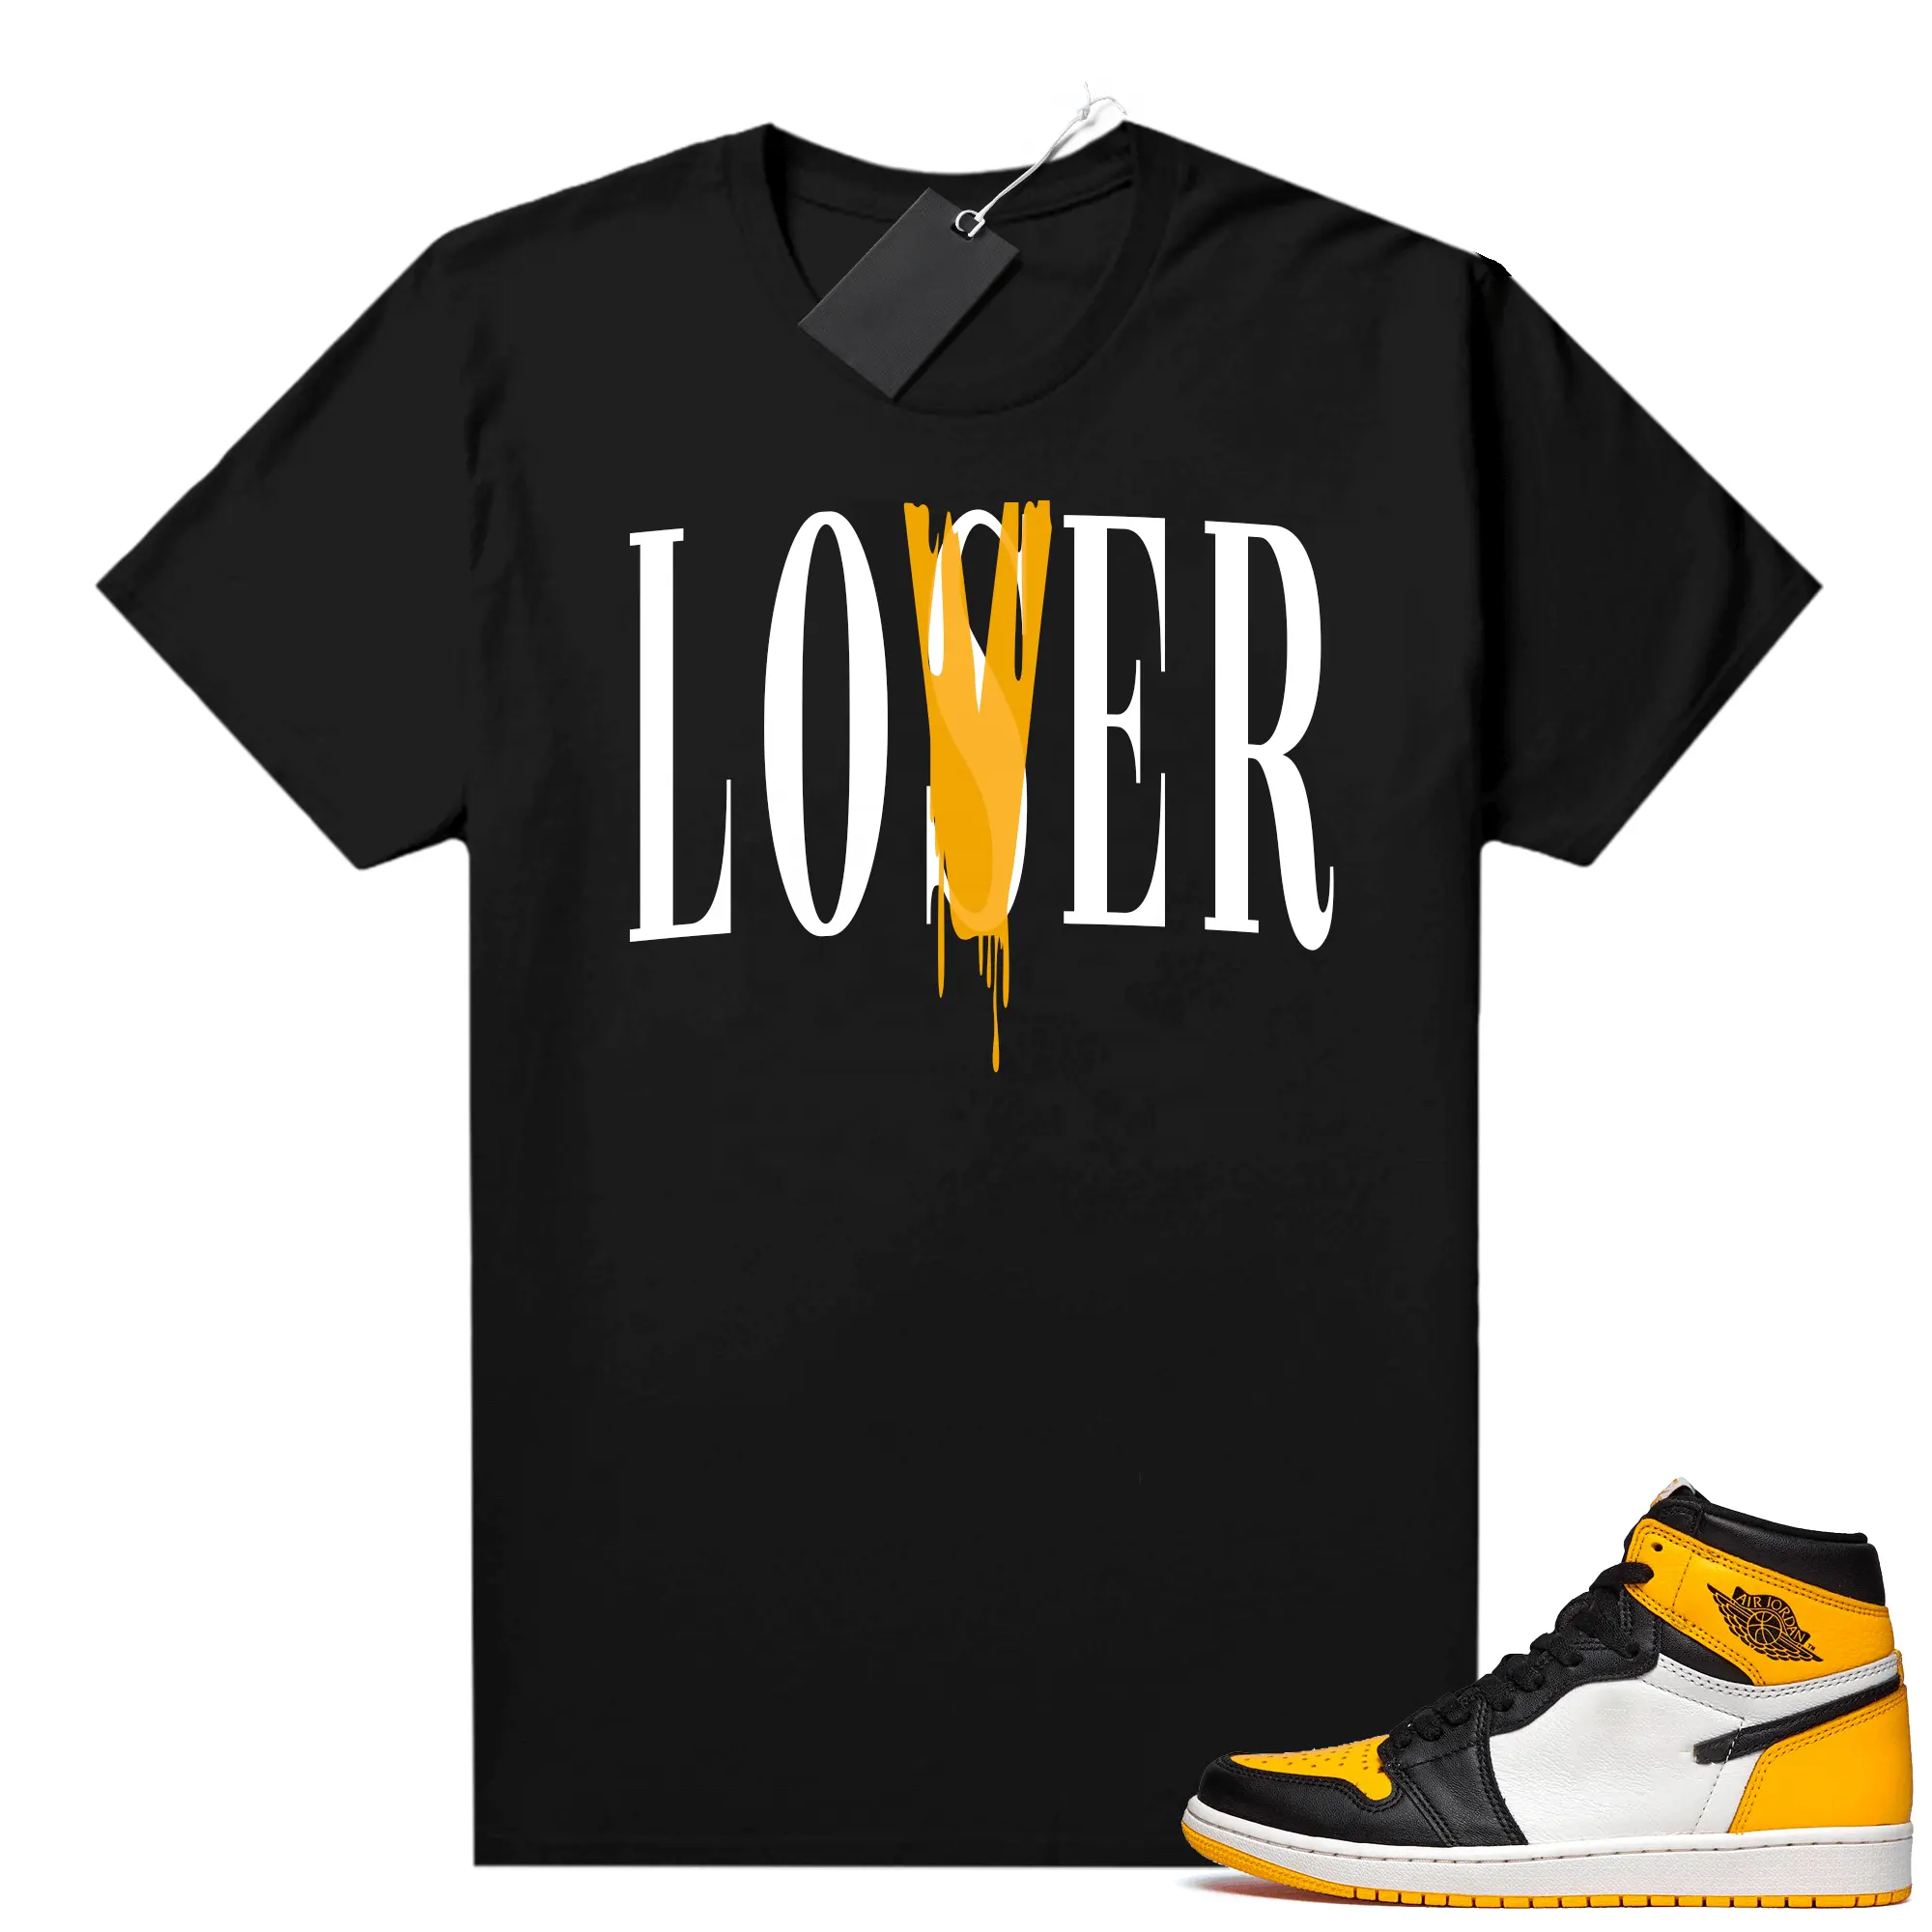 Taxi 1s Matching Shirt Sneaker Men' Clothing And Graphic Sneaker Tees Black LOVER Print Unisex T Shirt